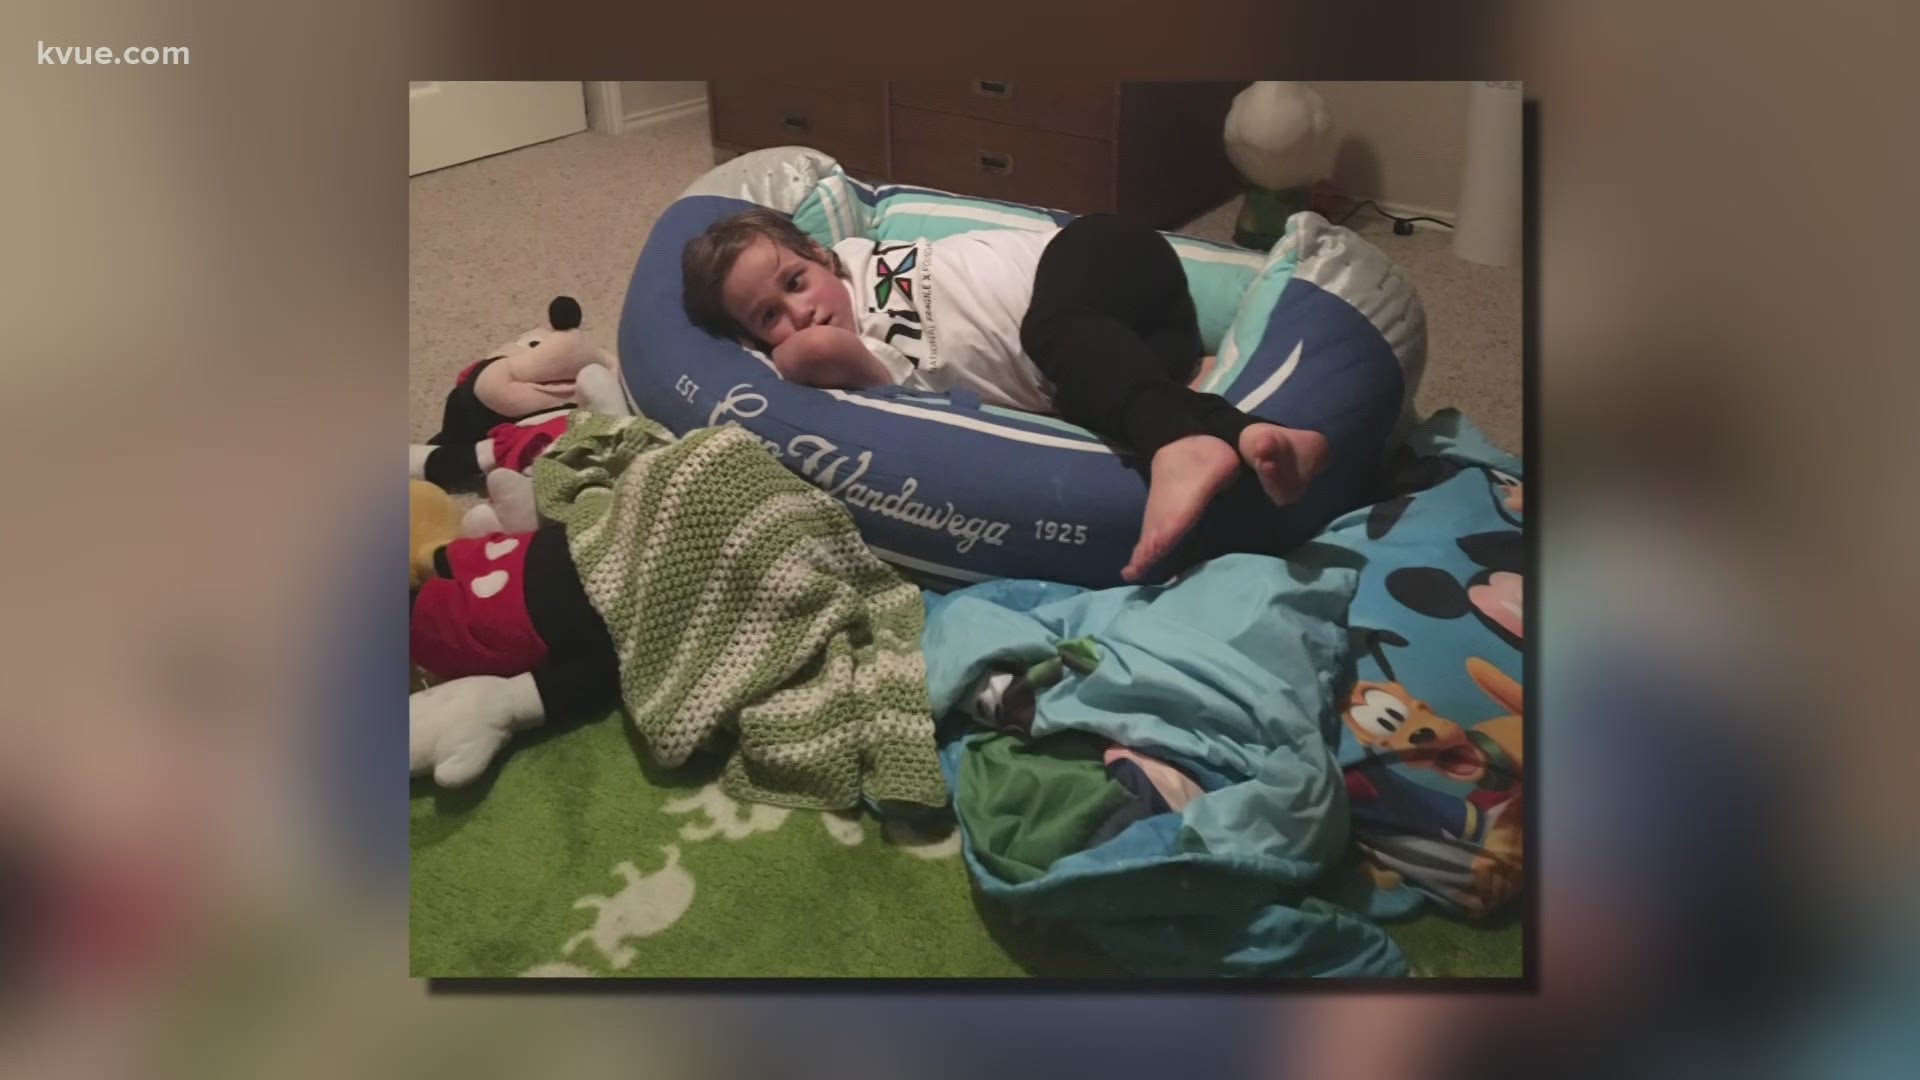 A Cedar Park mom hopes her son's rare medical condition and use of medical marijuana will open debate among Texas lawmakers on marijuana reform.